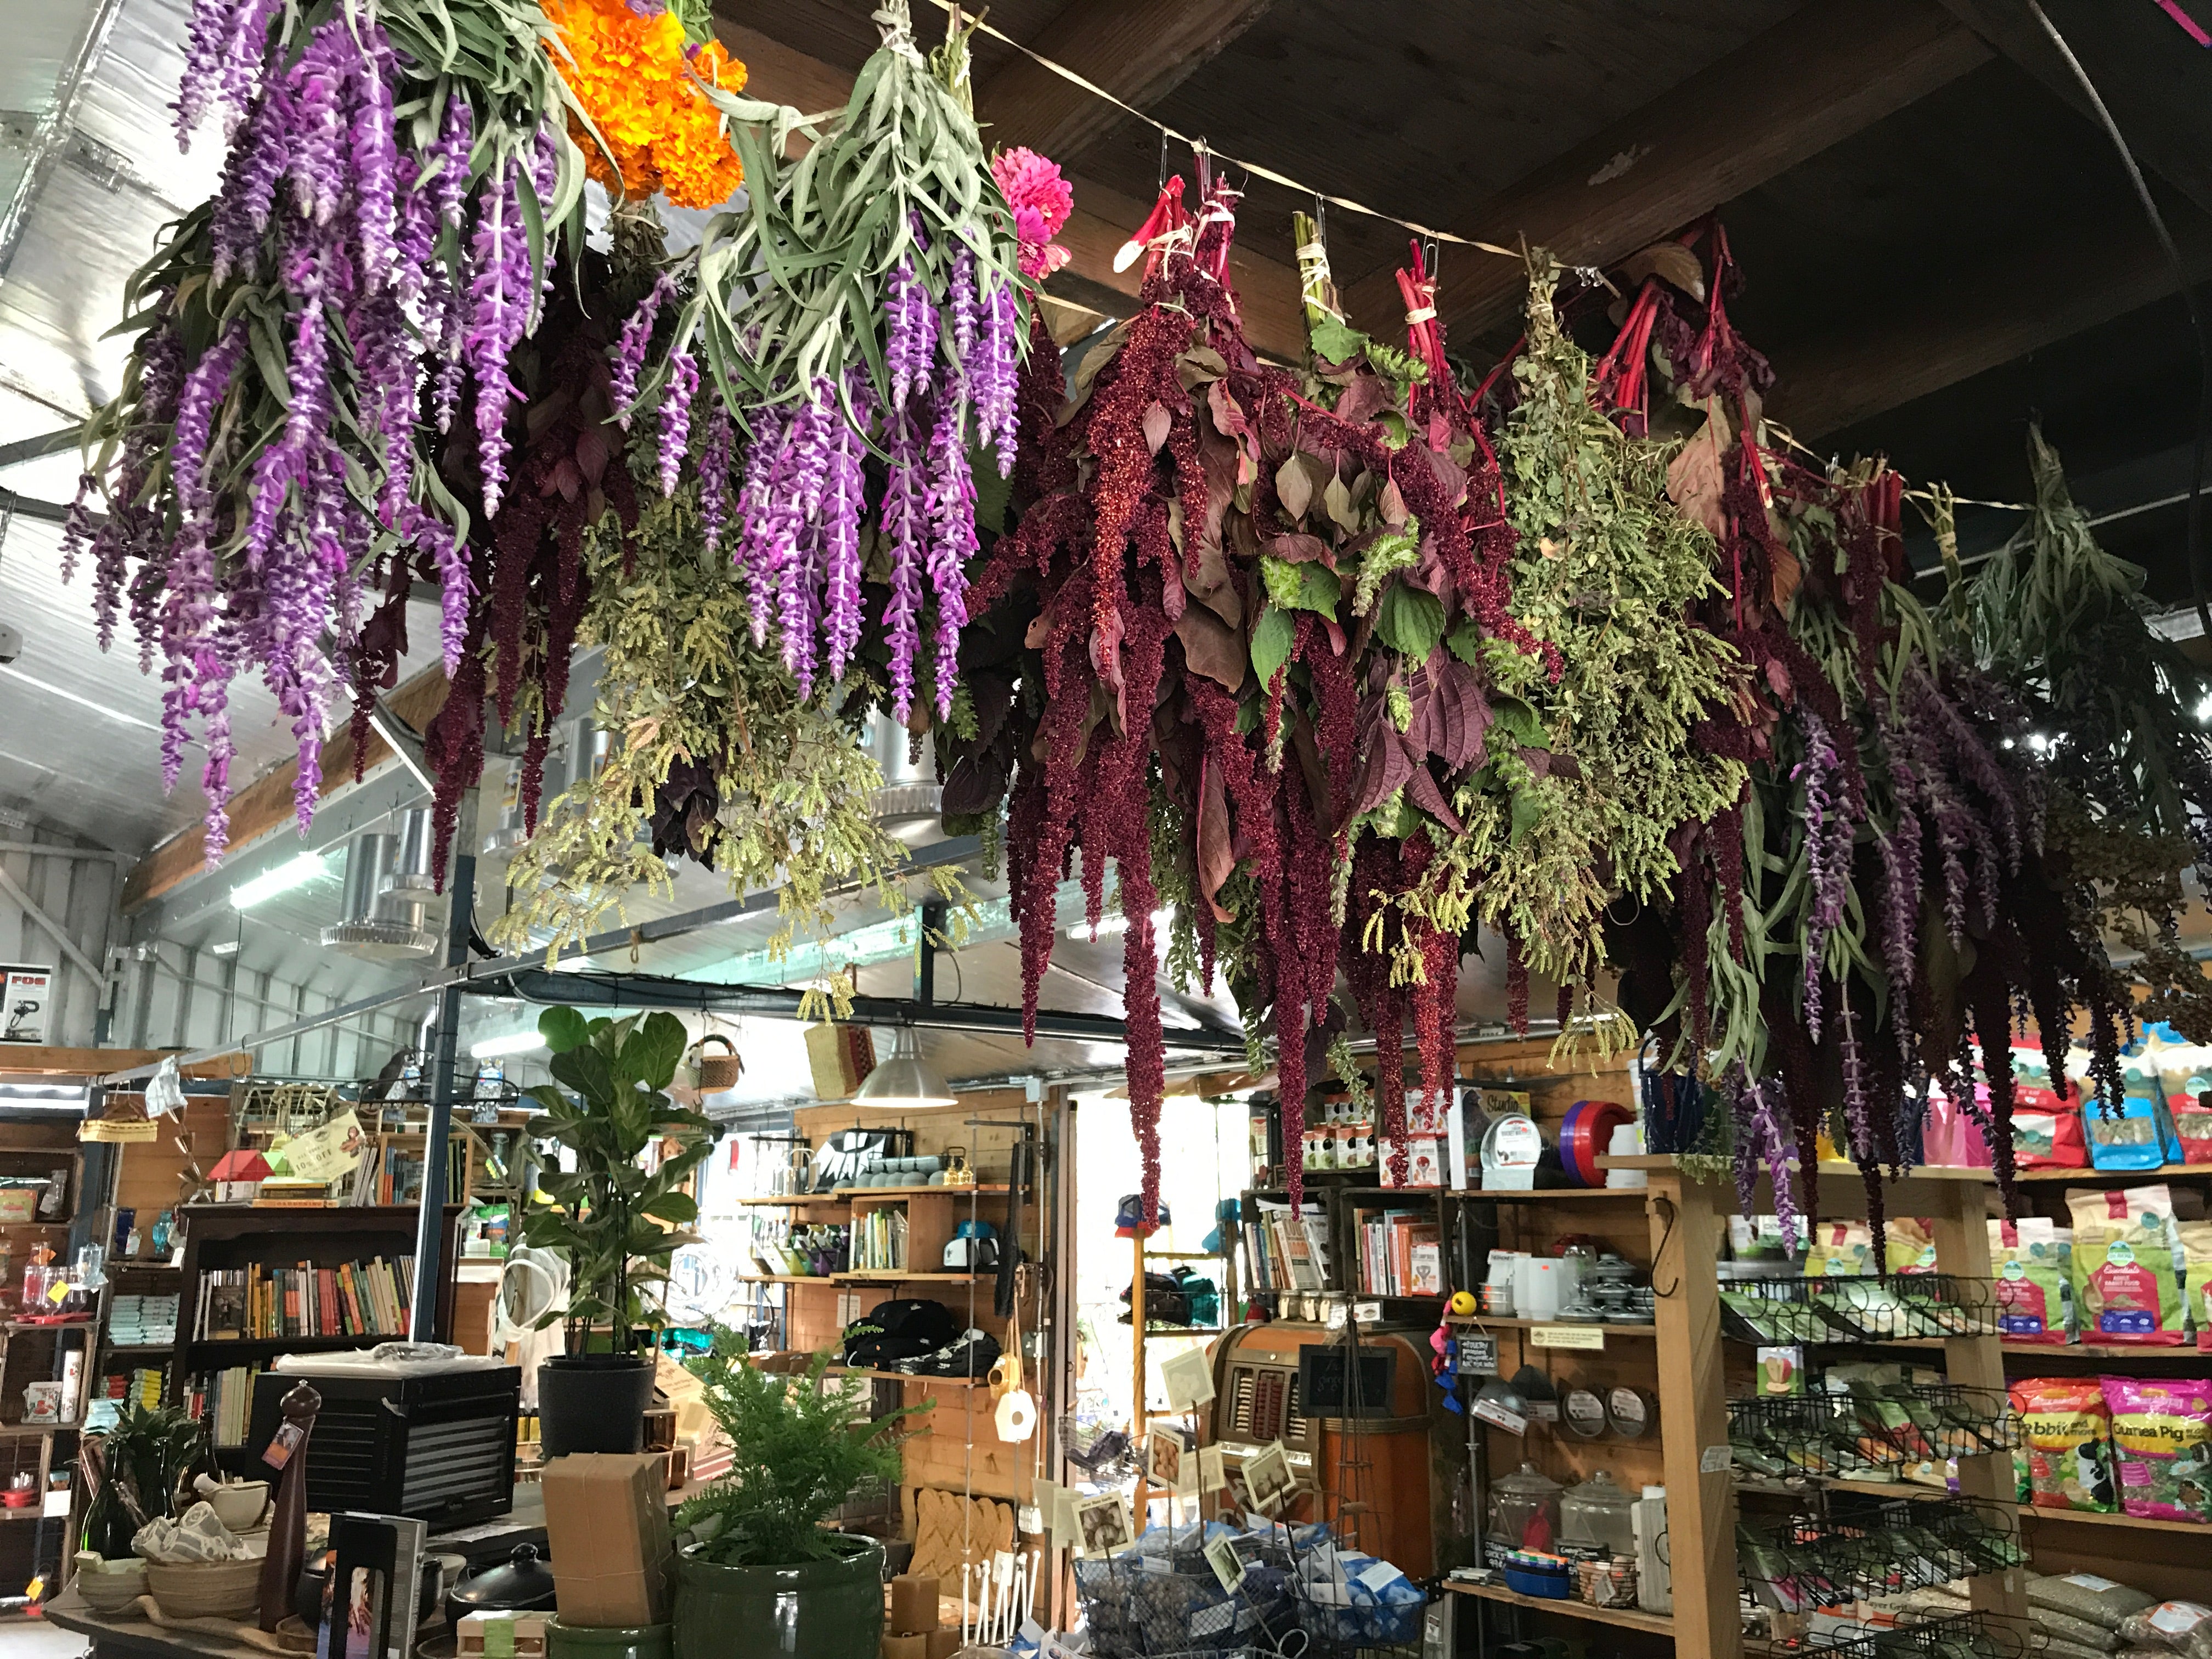 hanging dried herbs